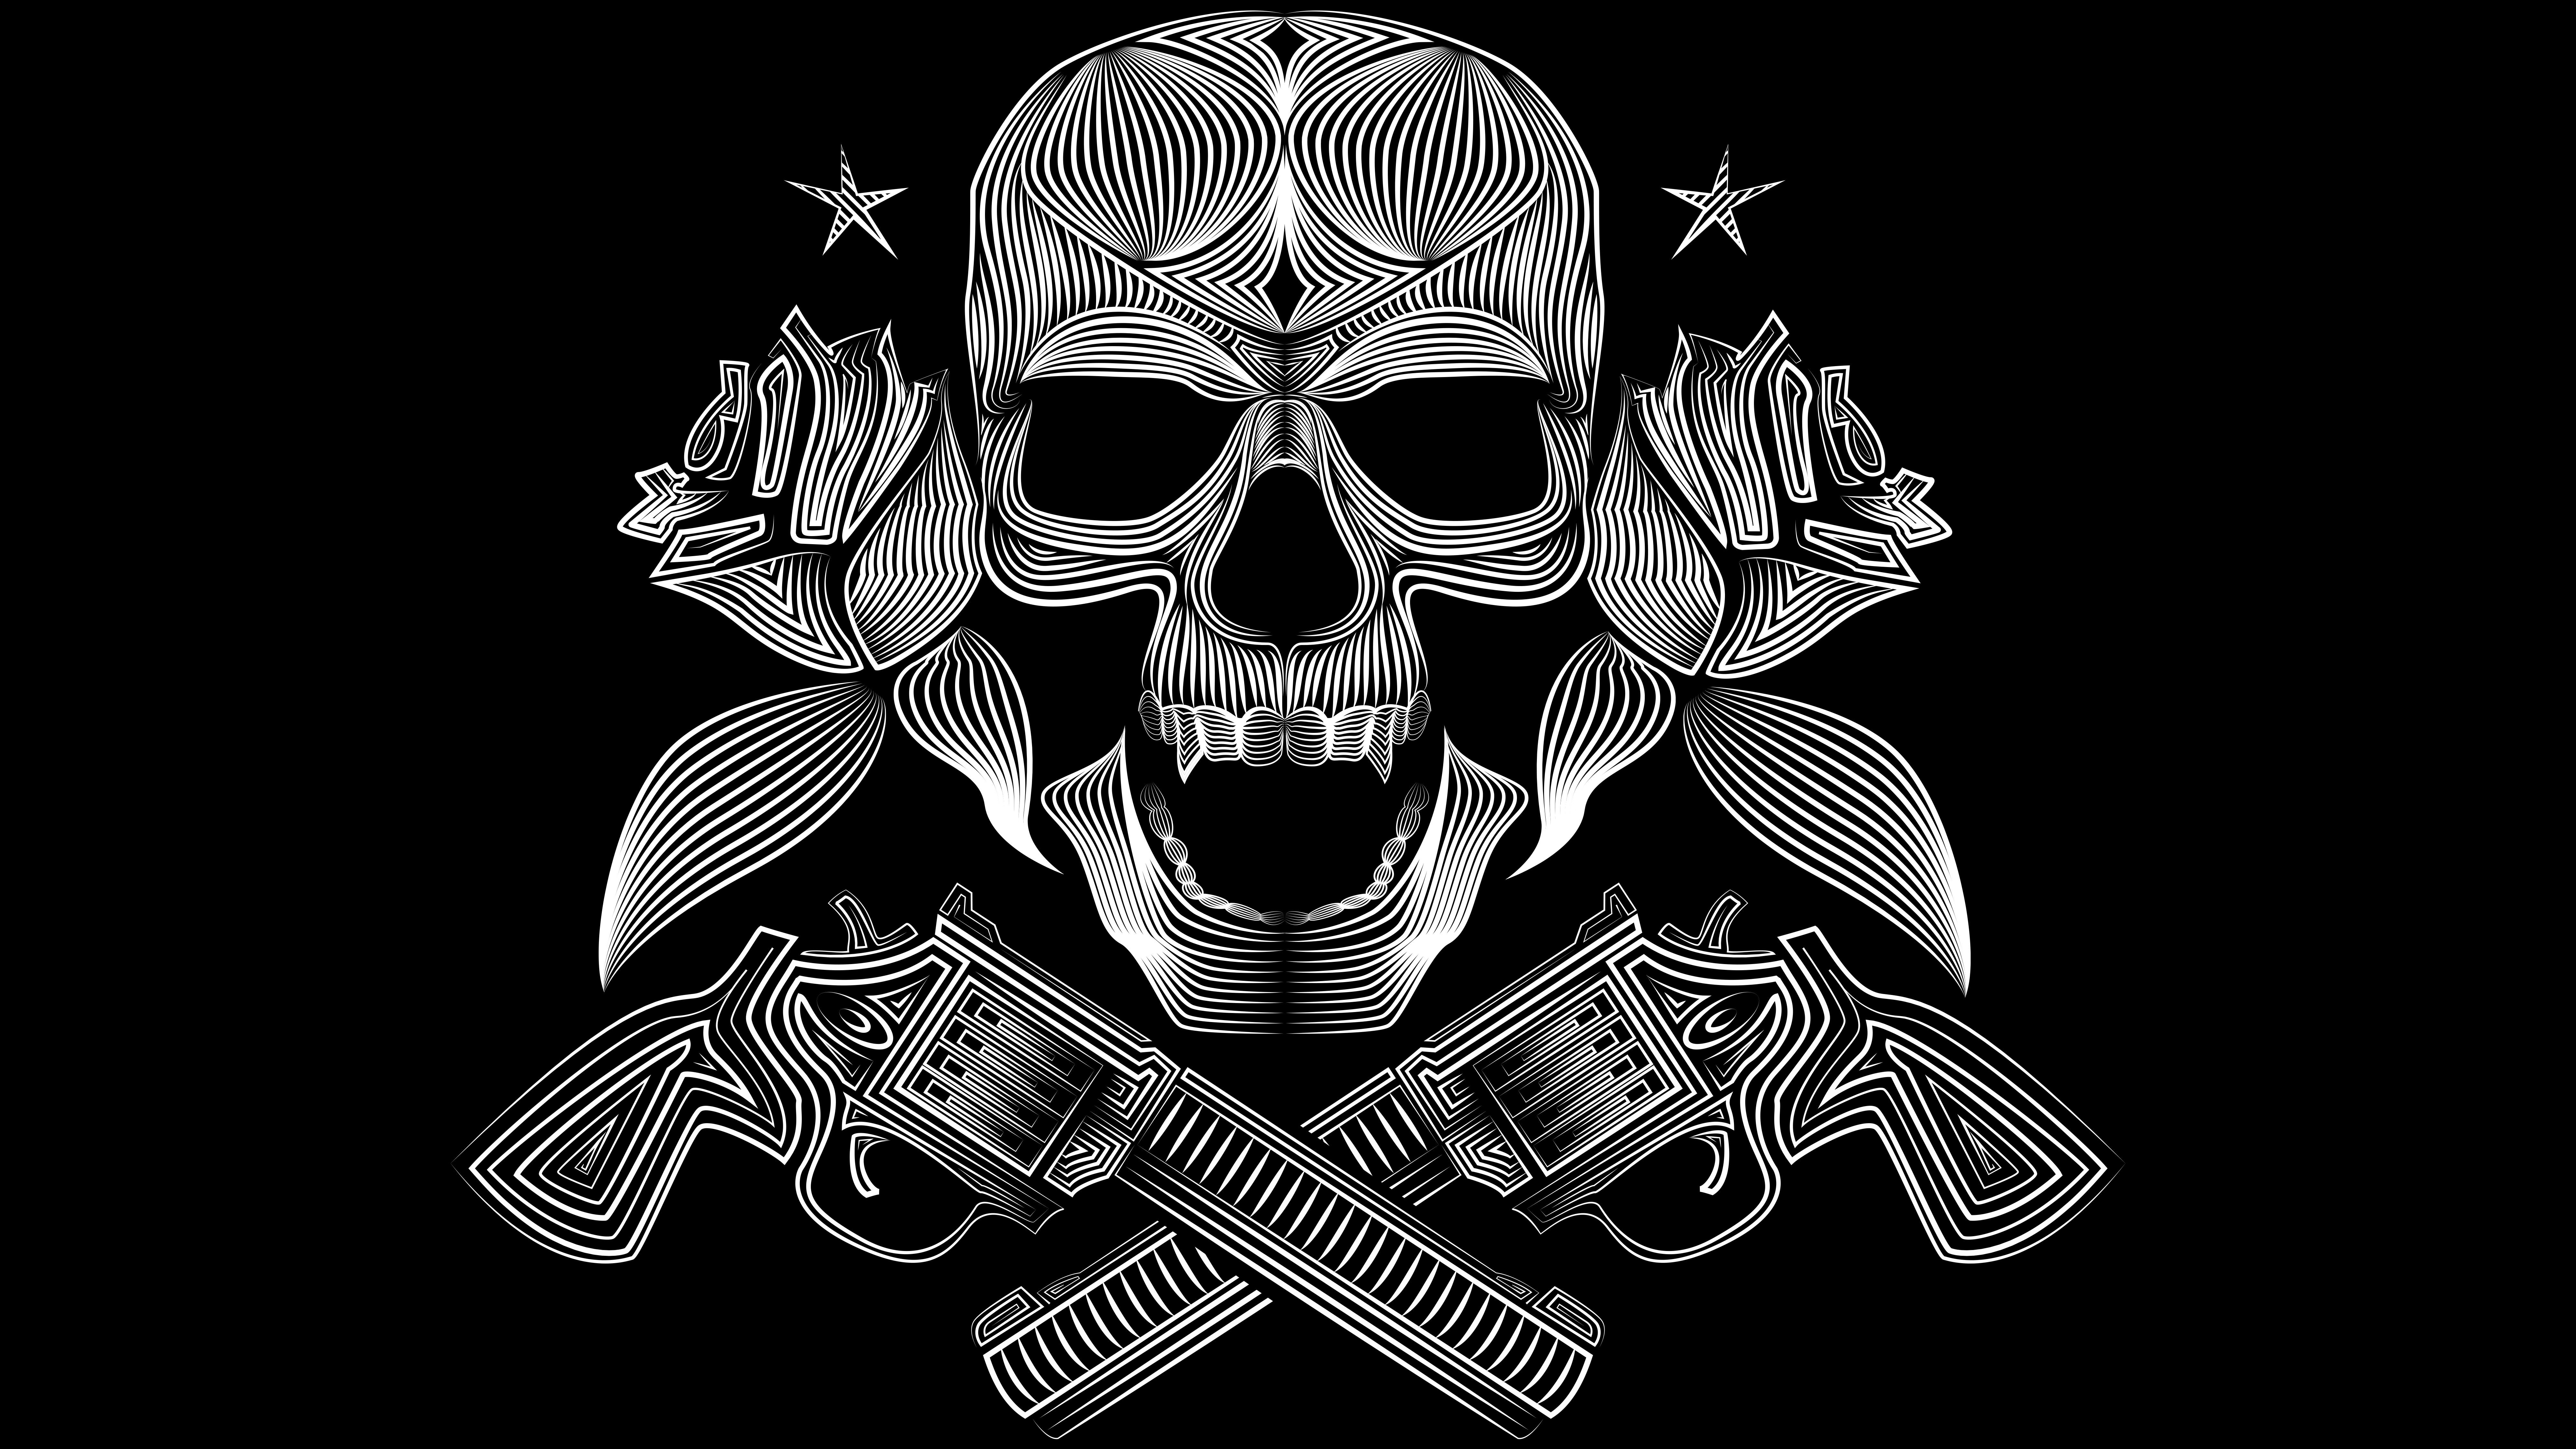 Skull Gangsters Vector Wallpaper, HD Vector 4K Wallpaper, Image, Photo and Background